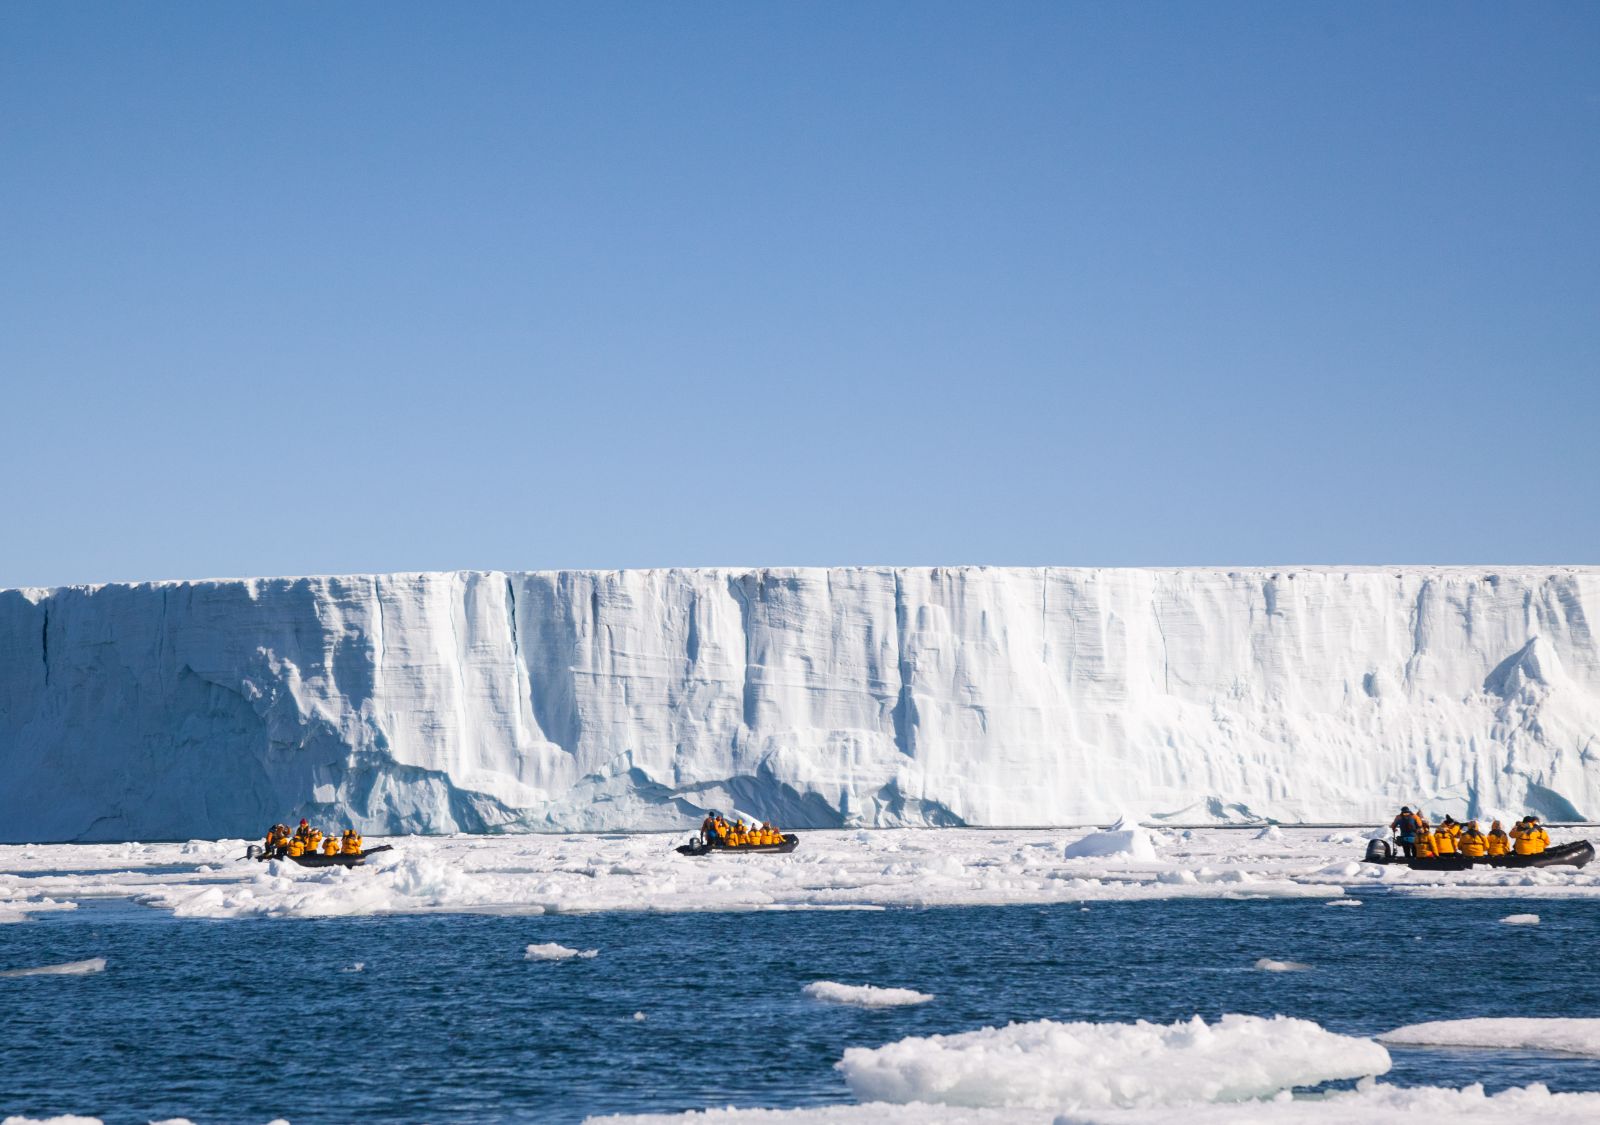 Three Zodiacs at the face of an enormous tabular iceberg in Svalbard Norway